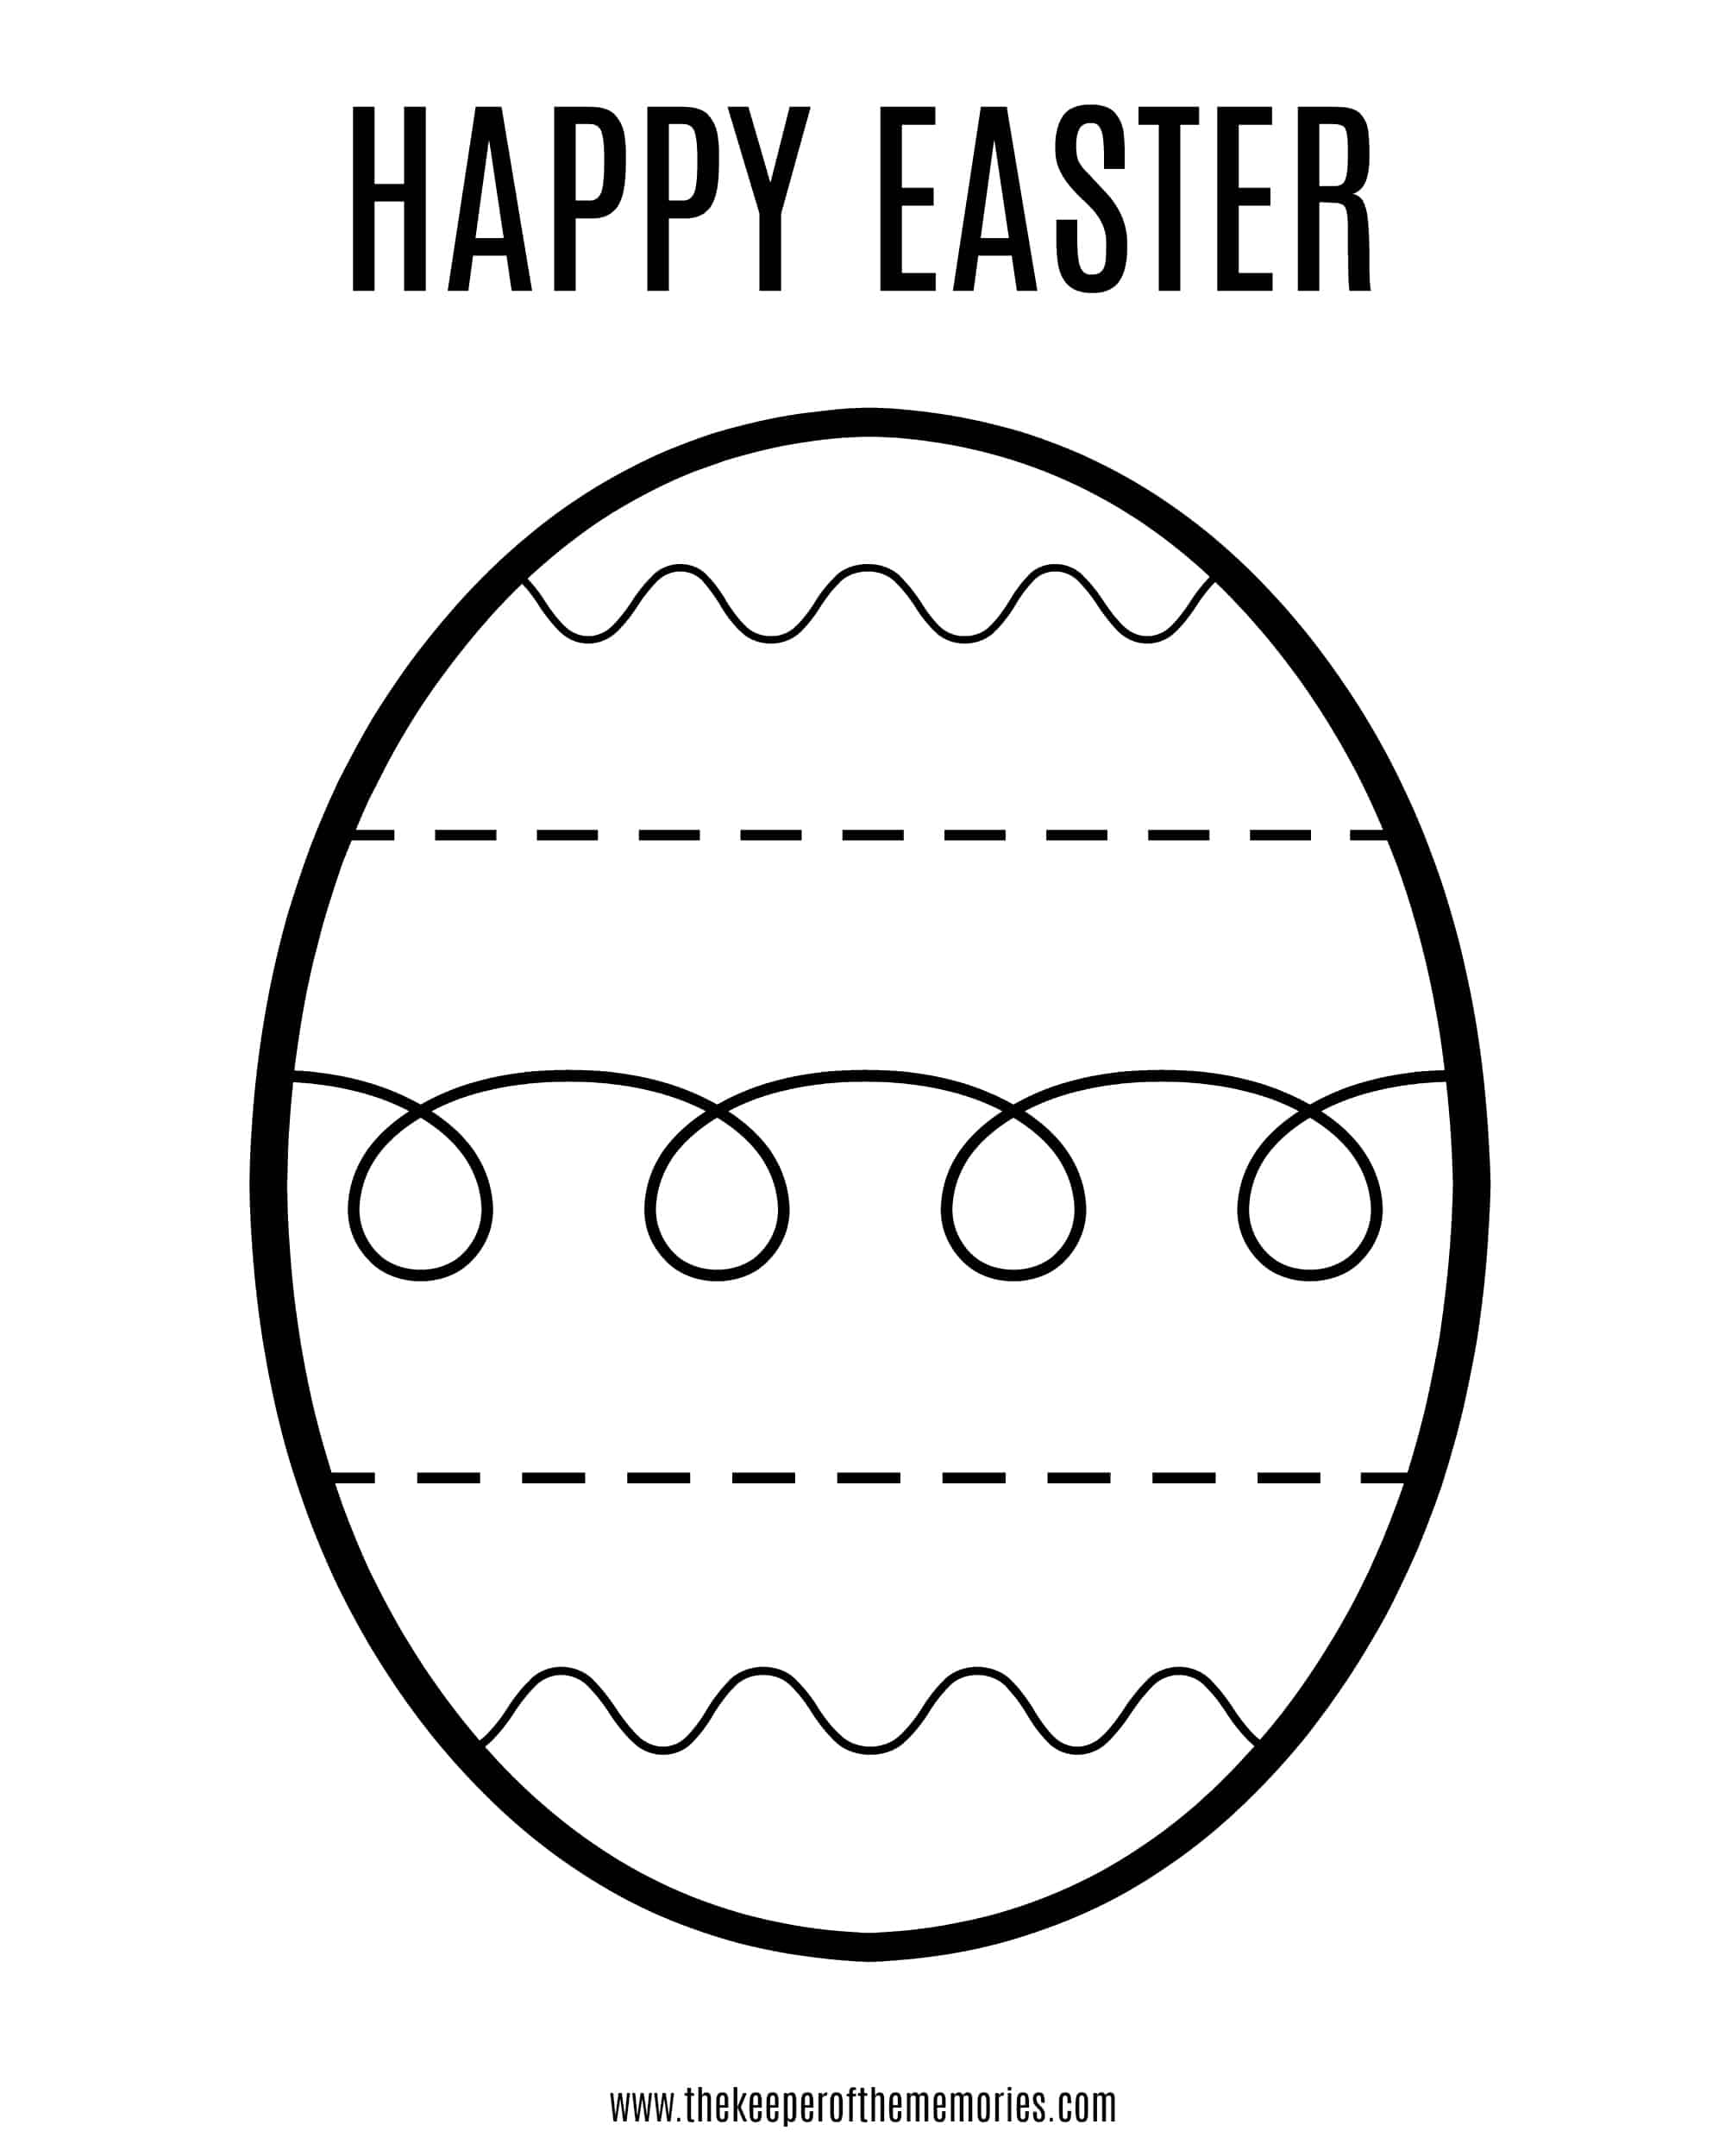 Free printable easter coloring sheet for little kids